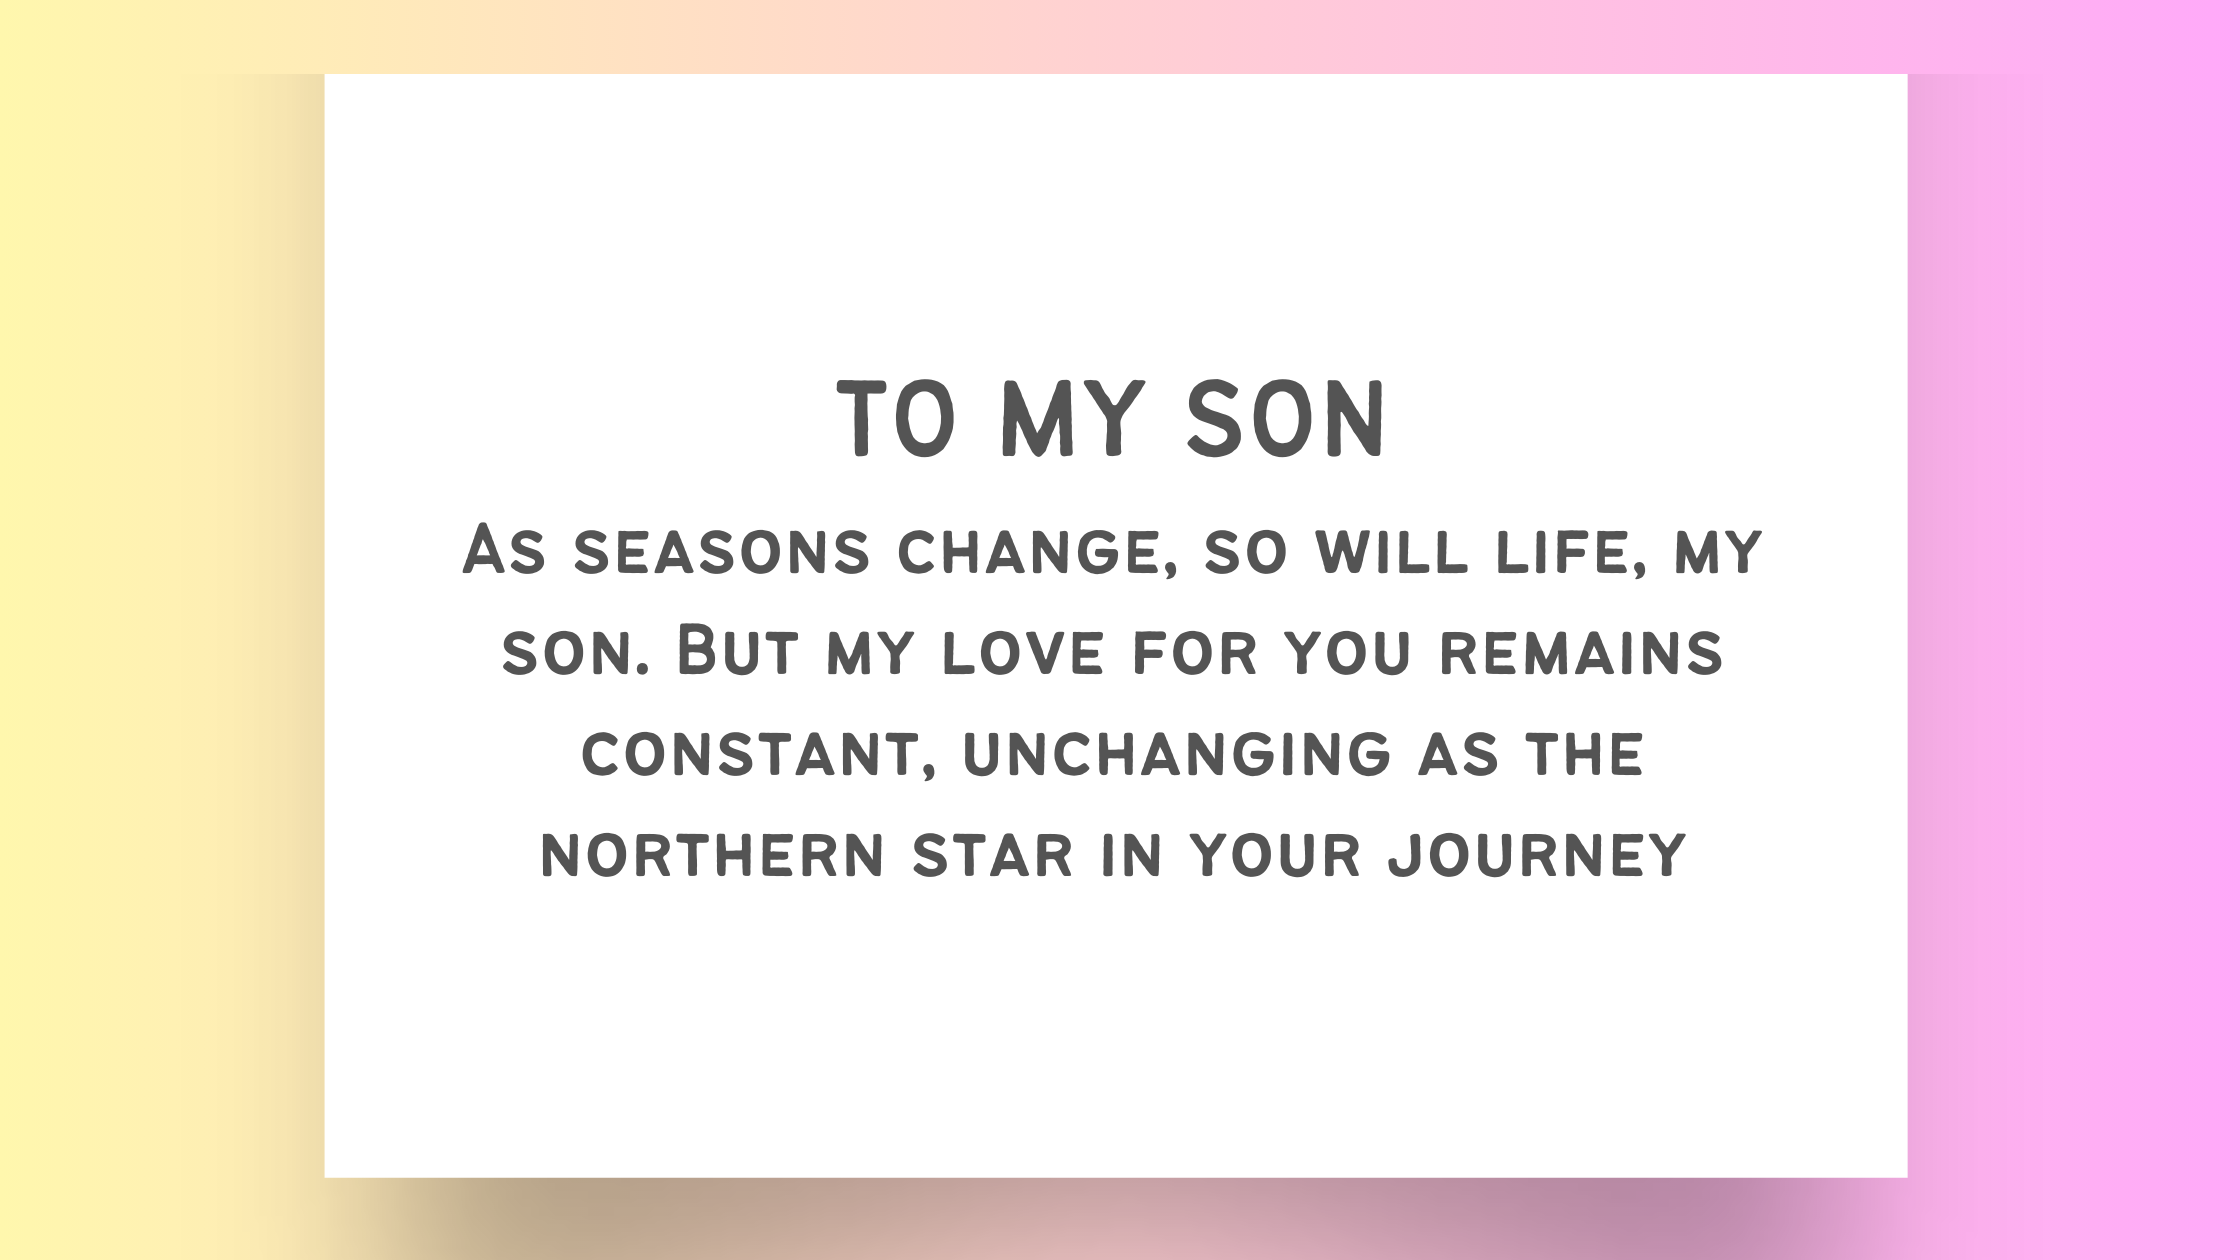 10 Tender Expressions: A Mother's Loving Words to Her Son